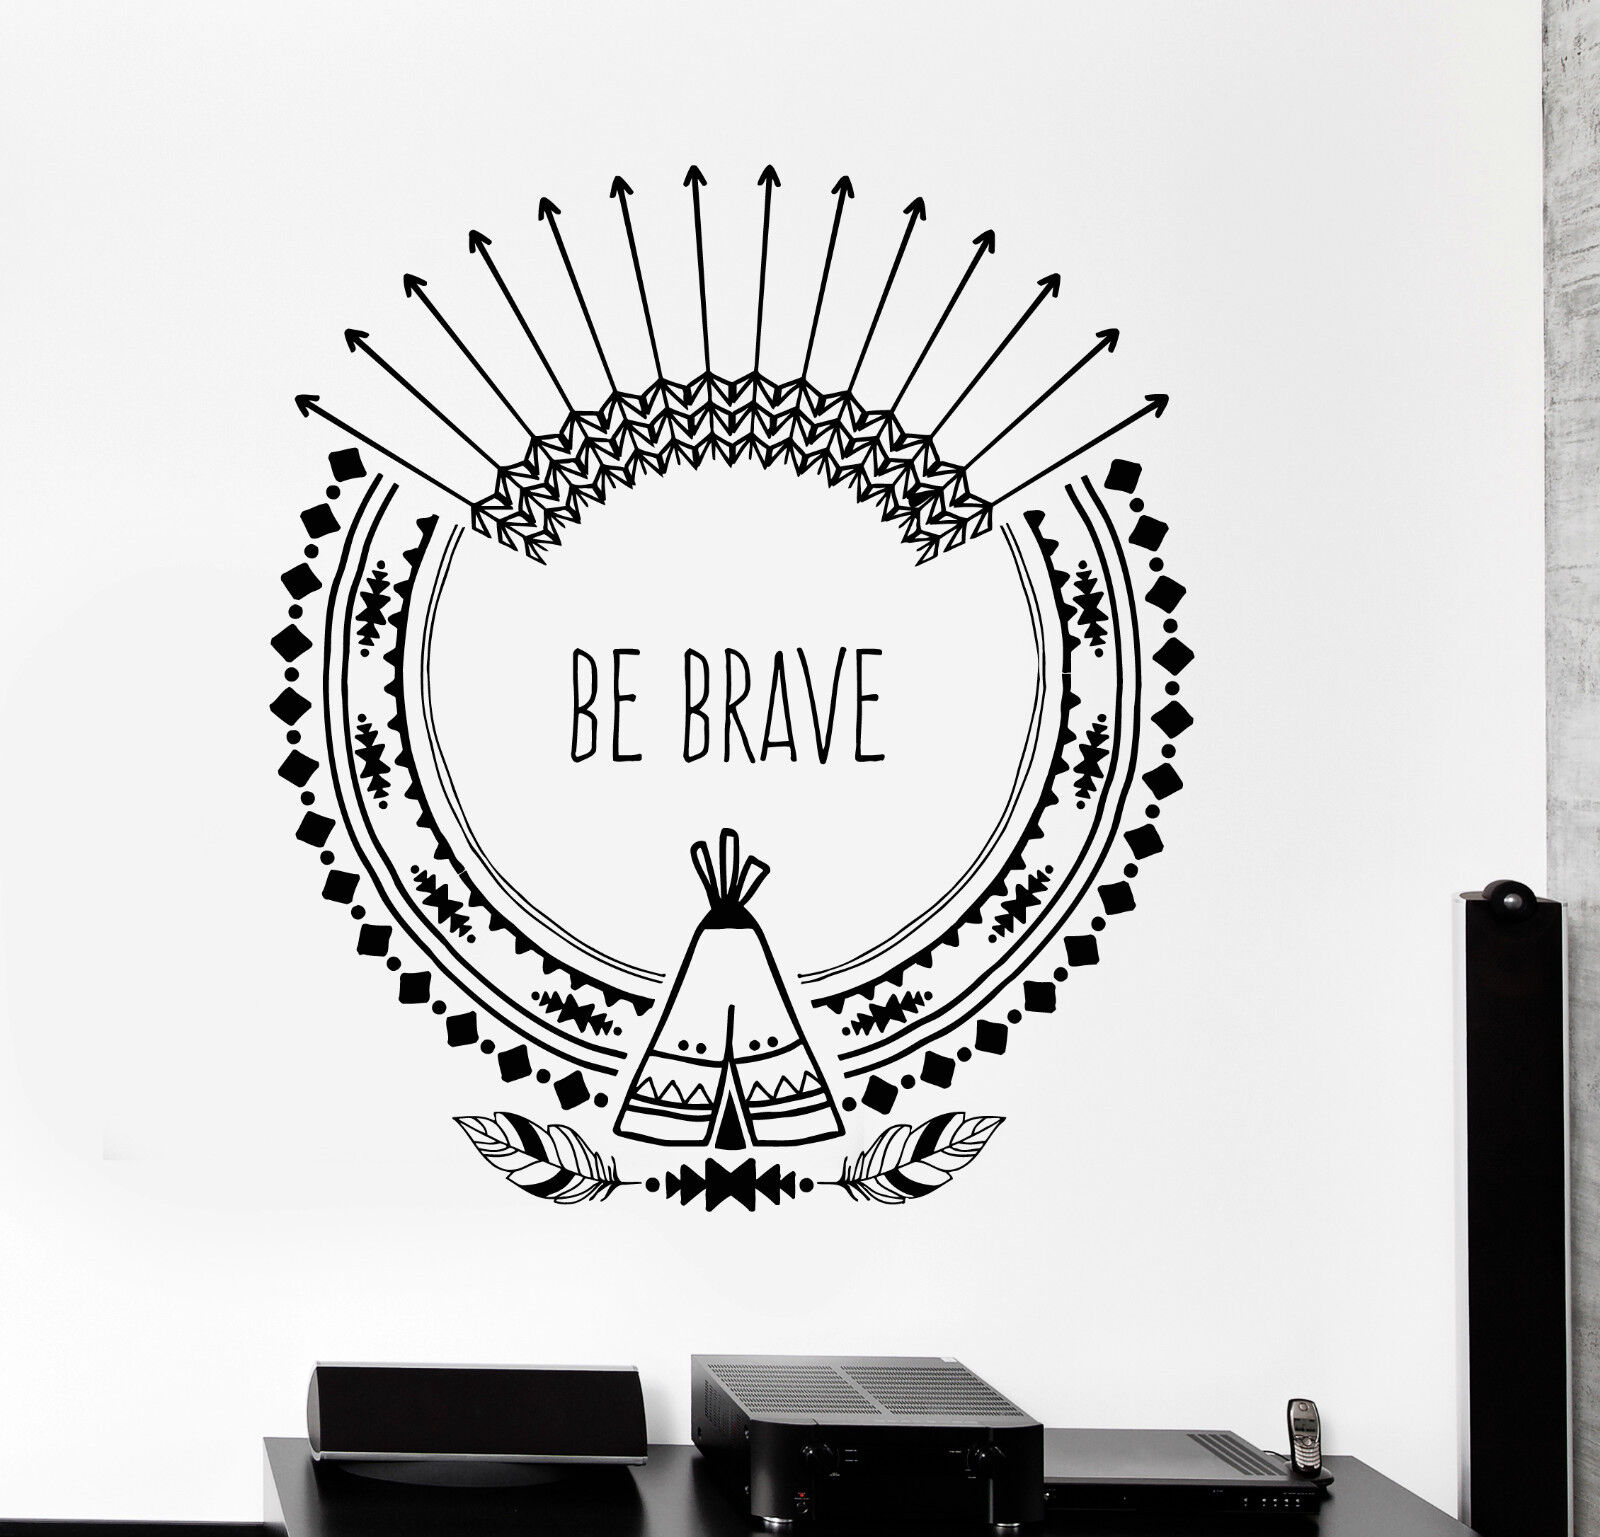 Vinyl Wall Decal Inspire Quote Arrows Ethnic Art Feathers Stickers (ig4236)